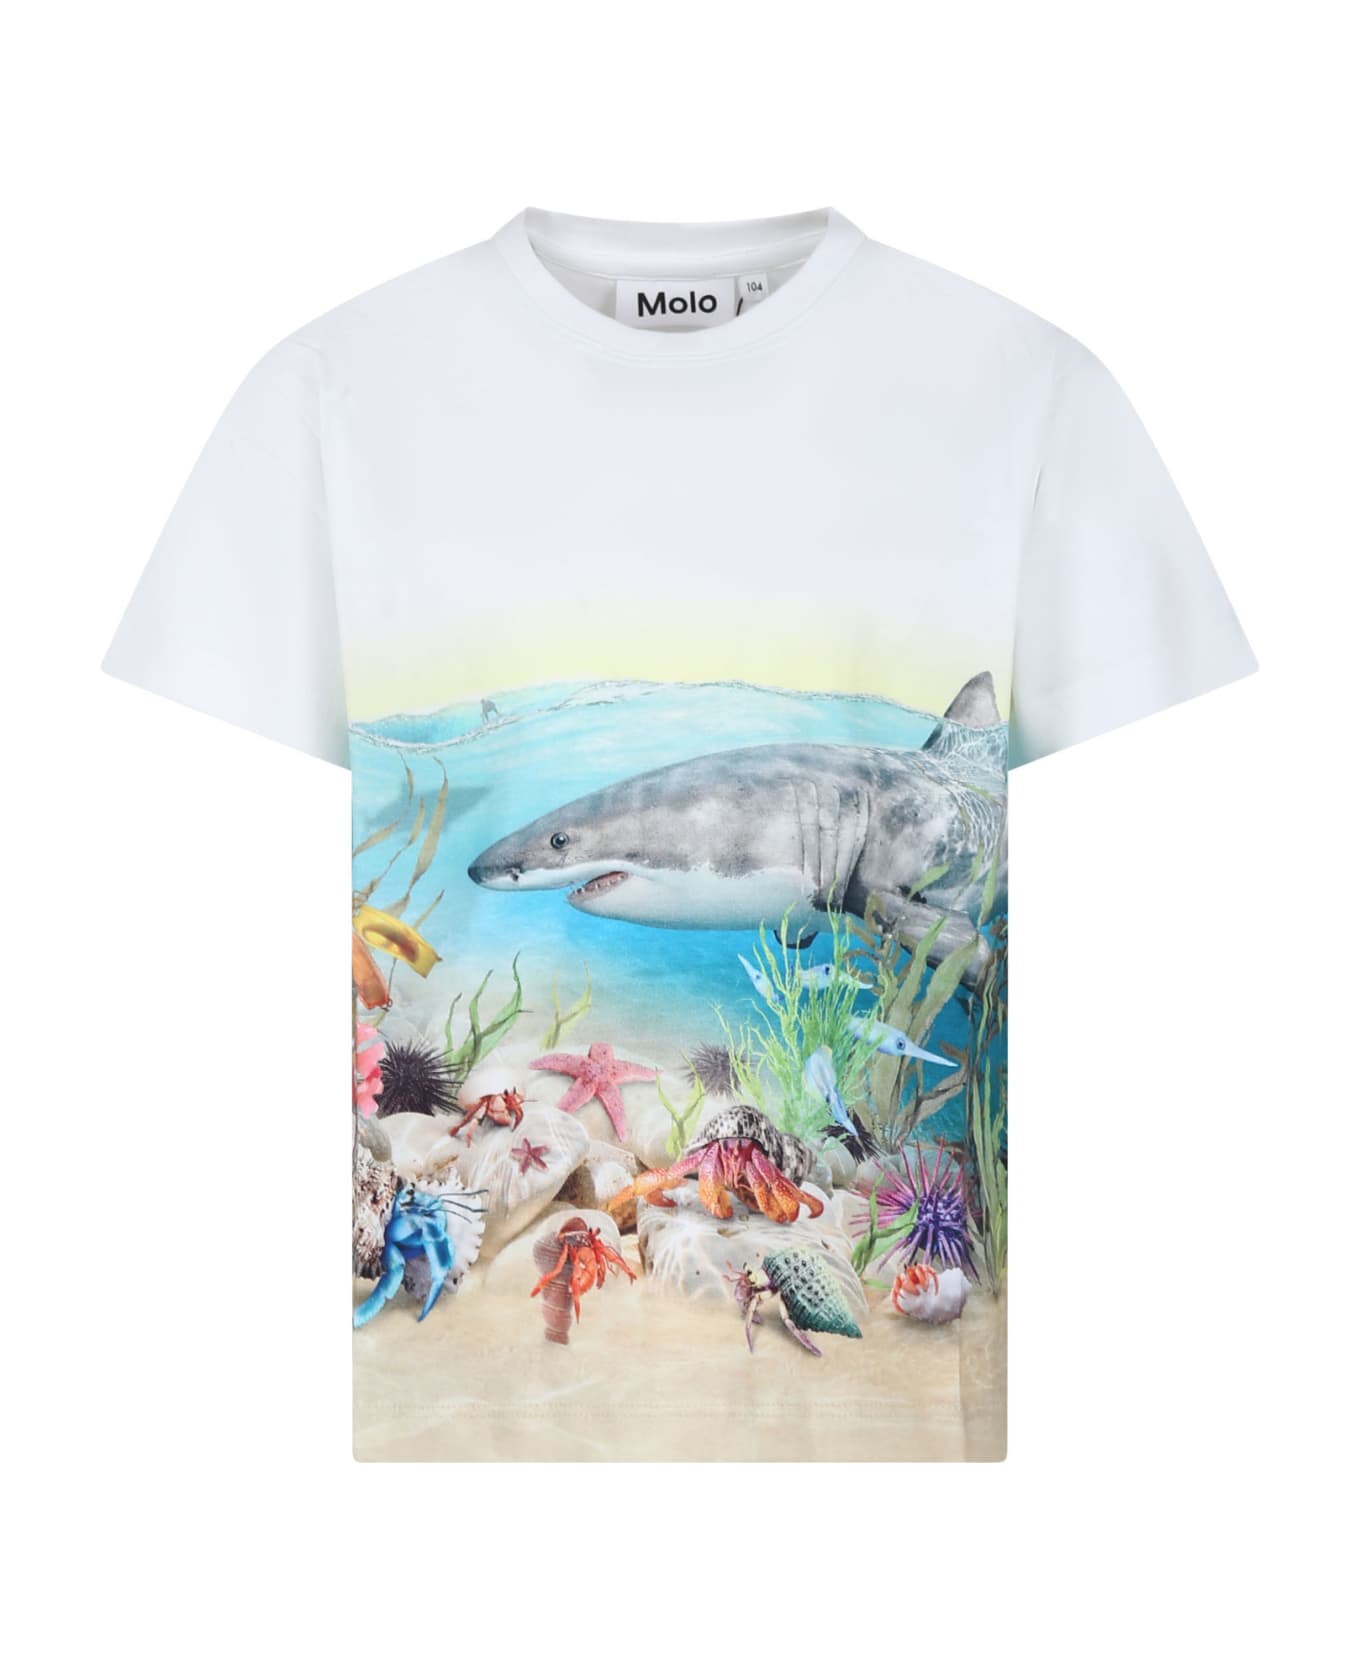 Molo White T-shirt For Boy With Shark Print - White